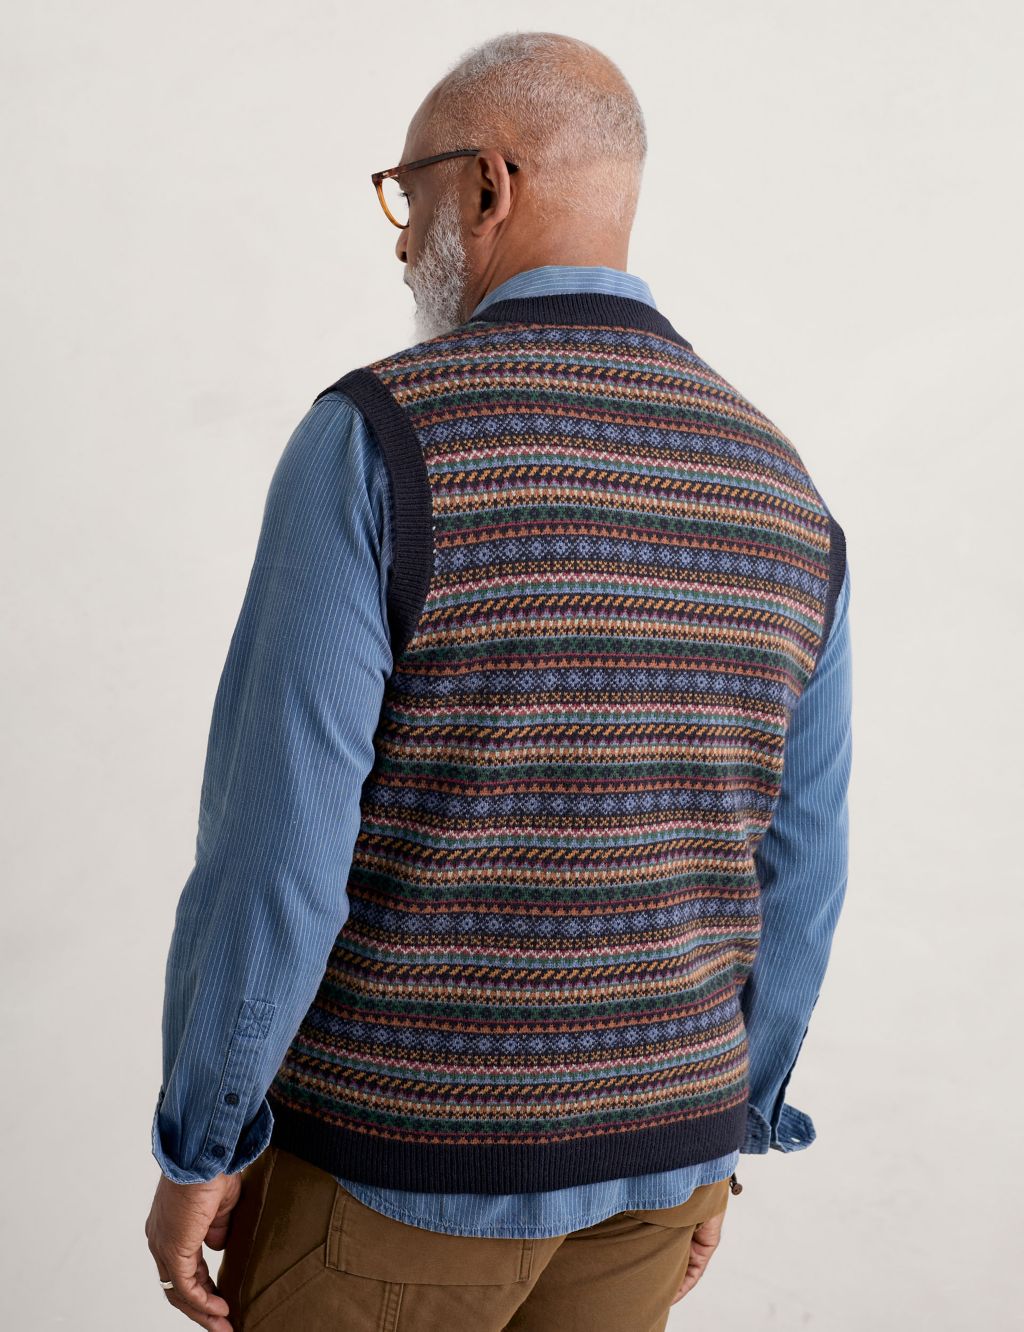 Cotton Rich Fair Isle Knitted Vest image 4